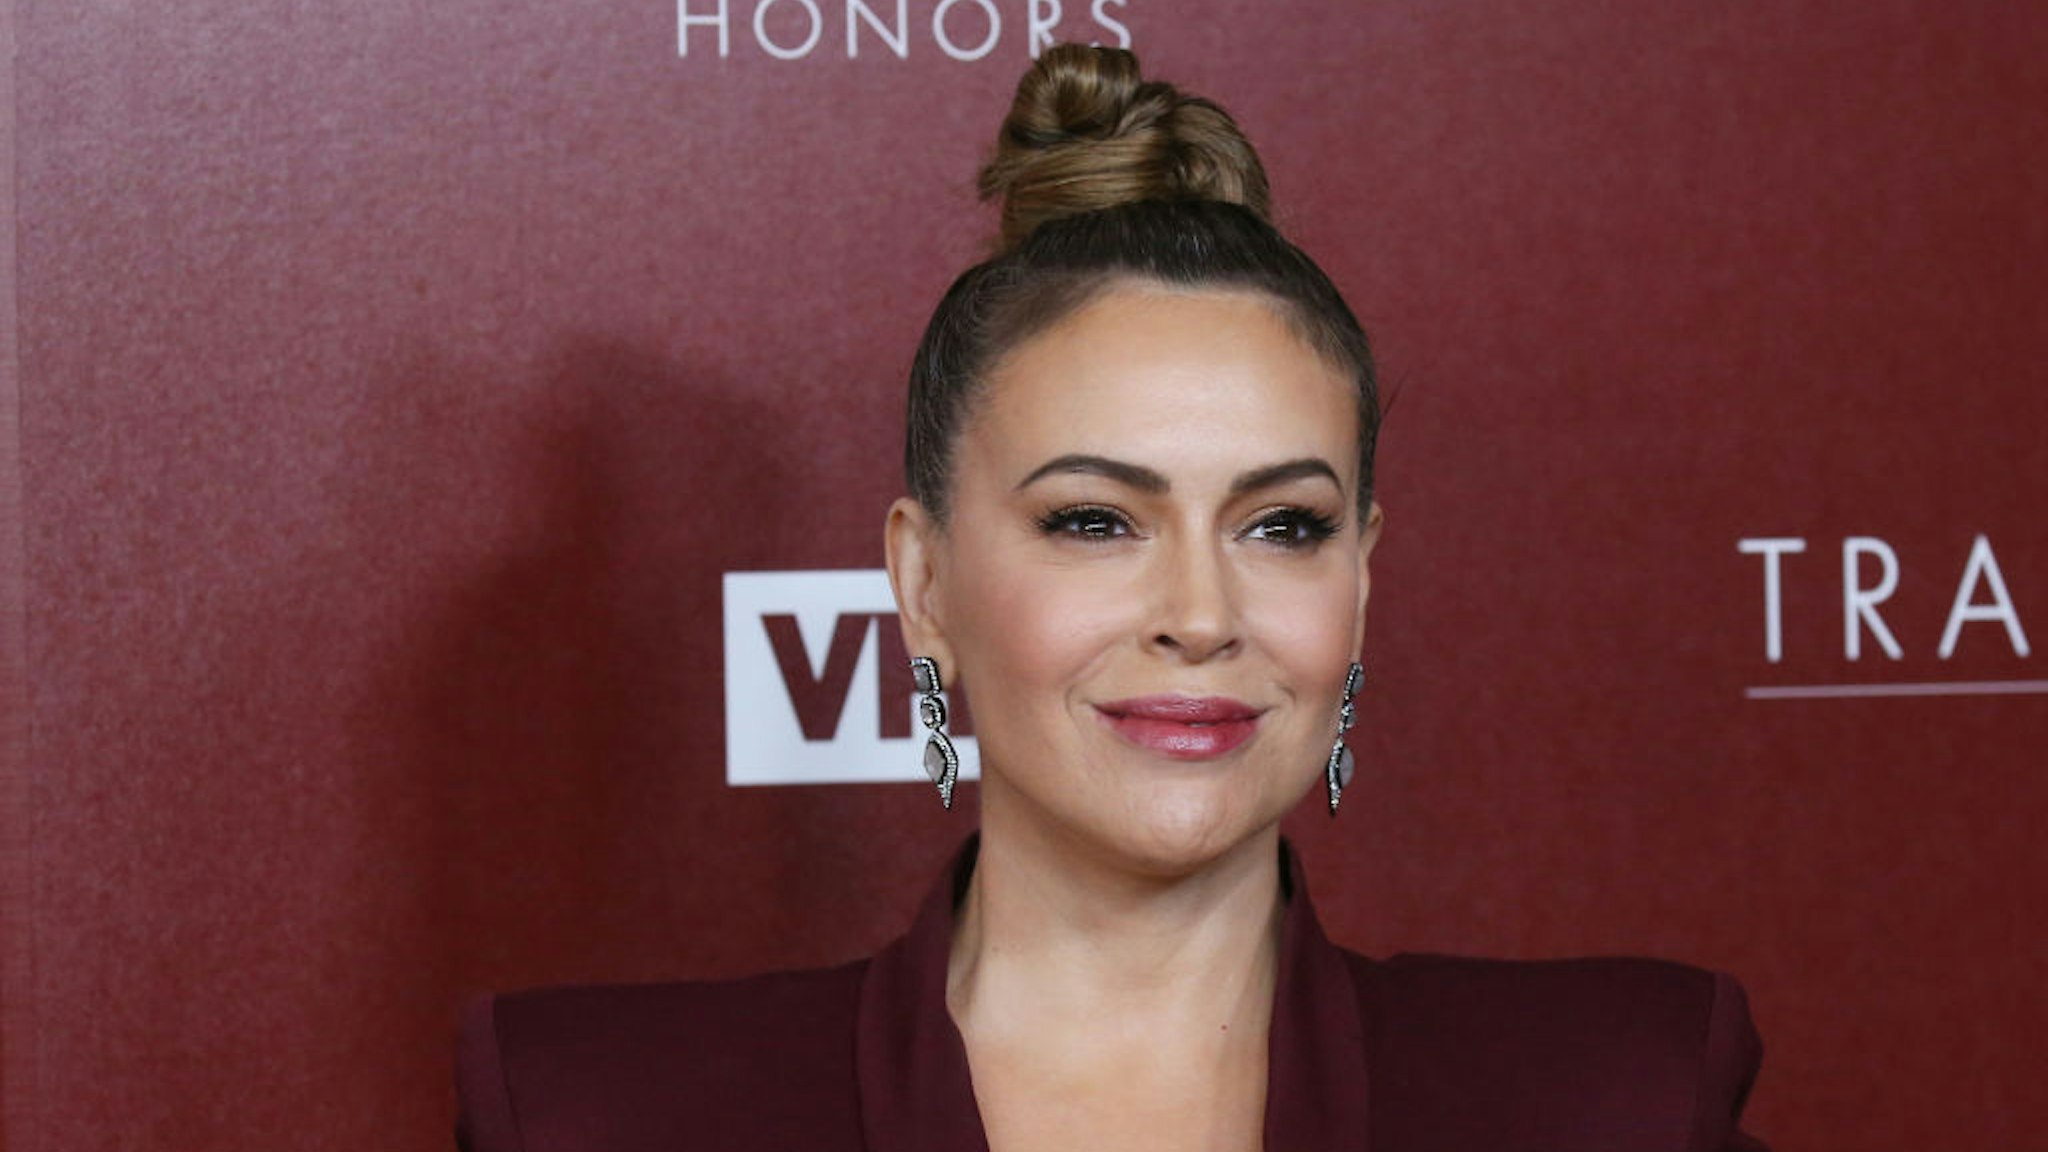 Alyssa Milano attends the VH1 Trailblazer Honors held at The Wilshire Ebell Theatre on February 20, 2019 in Los Angeles, California.